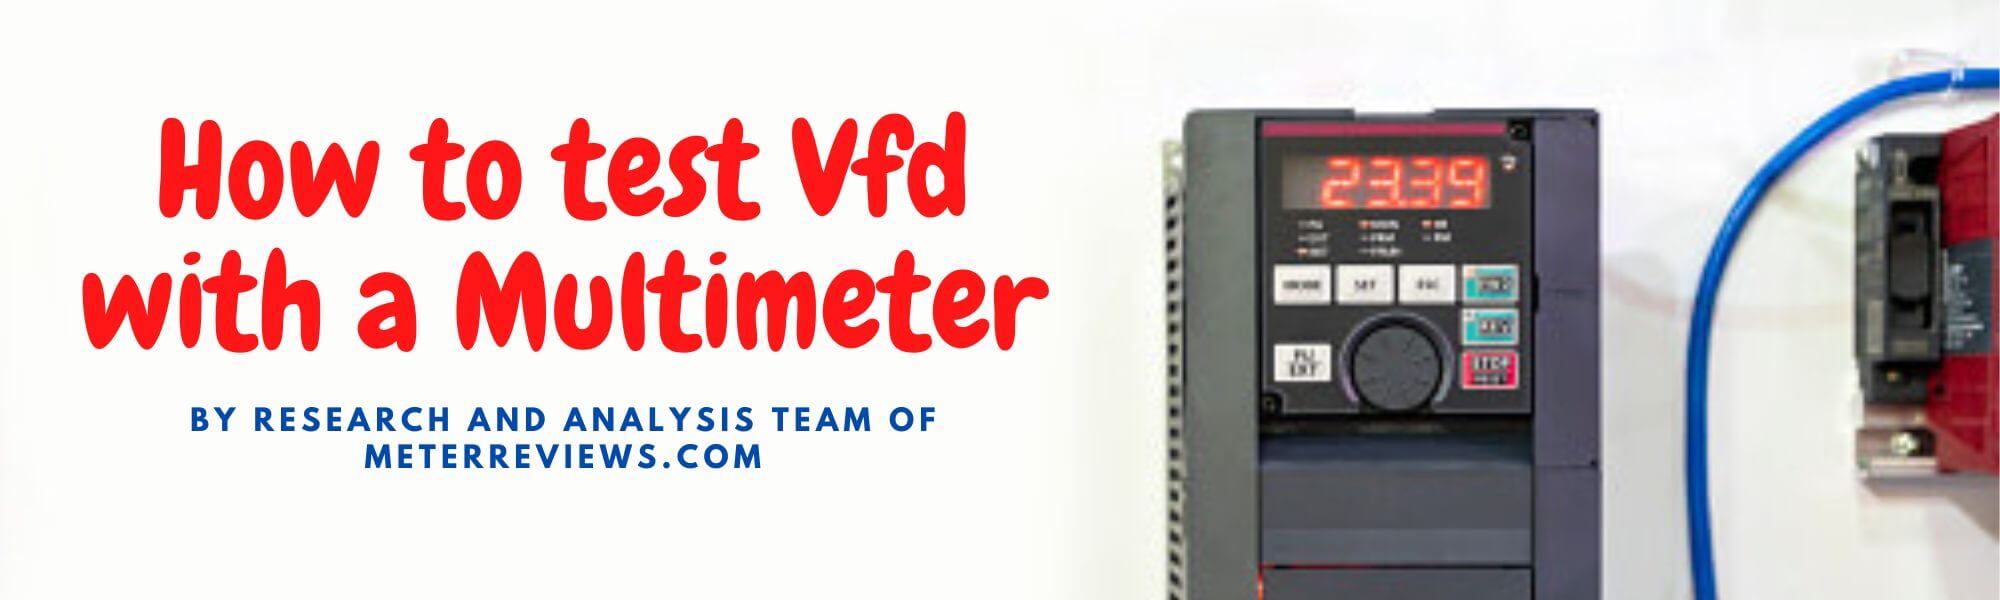 how to test vfd with multimeter